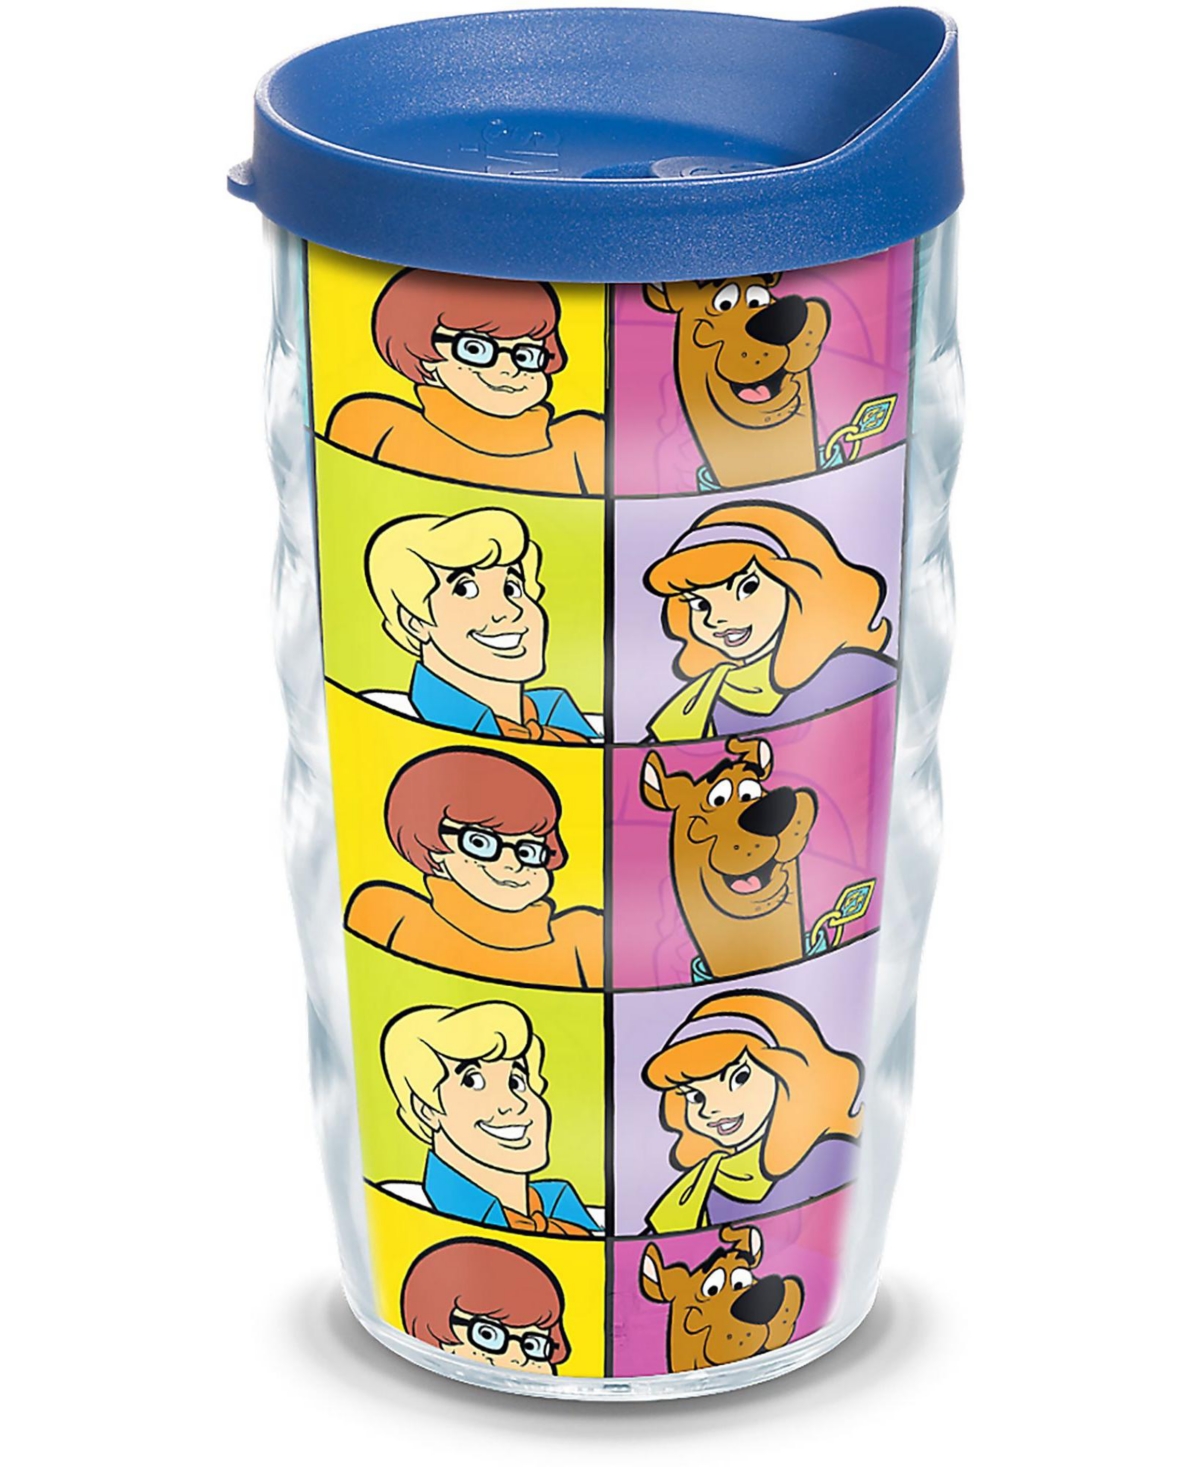 Tervis Tumbler Tervis Warner Brothers - Scooby-doo Made In Usa Double Walled Insulated Tumbler Travel Cup Keeps Dri In Open Miscellaneous